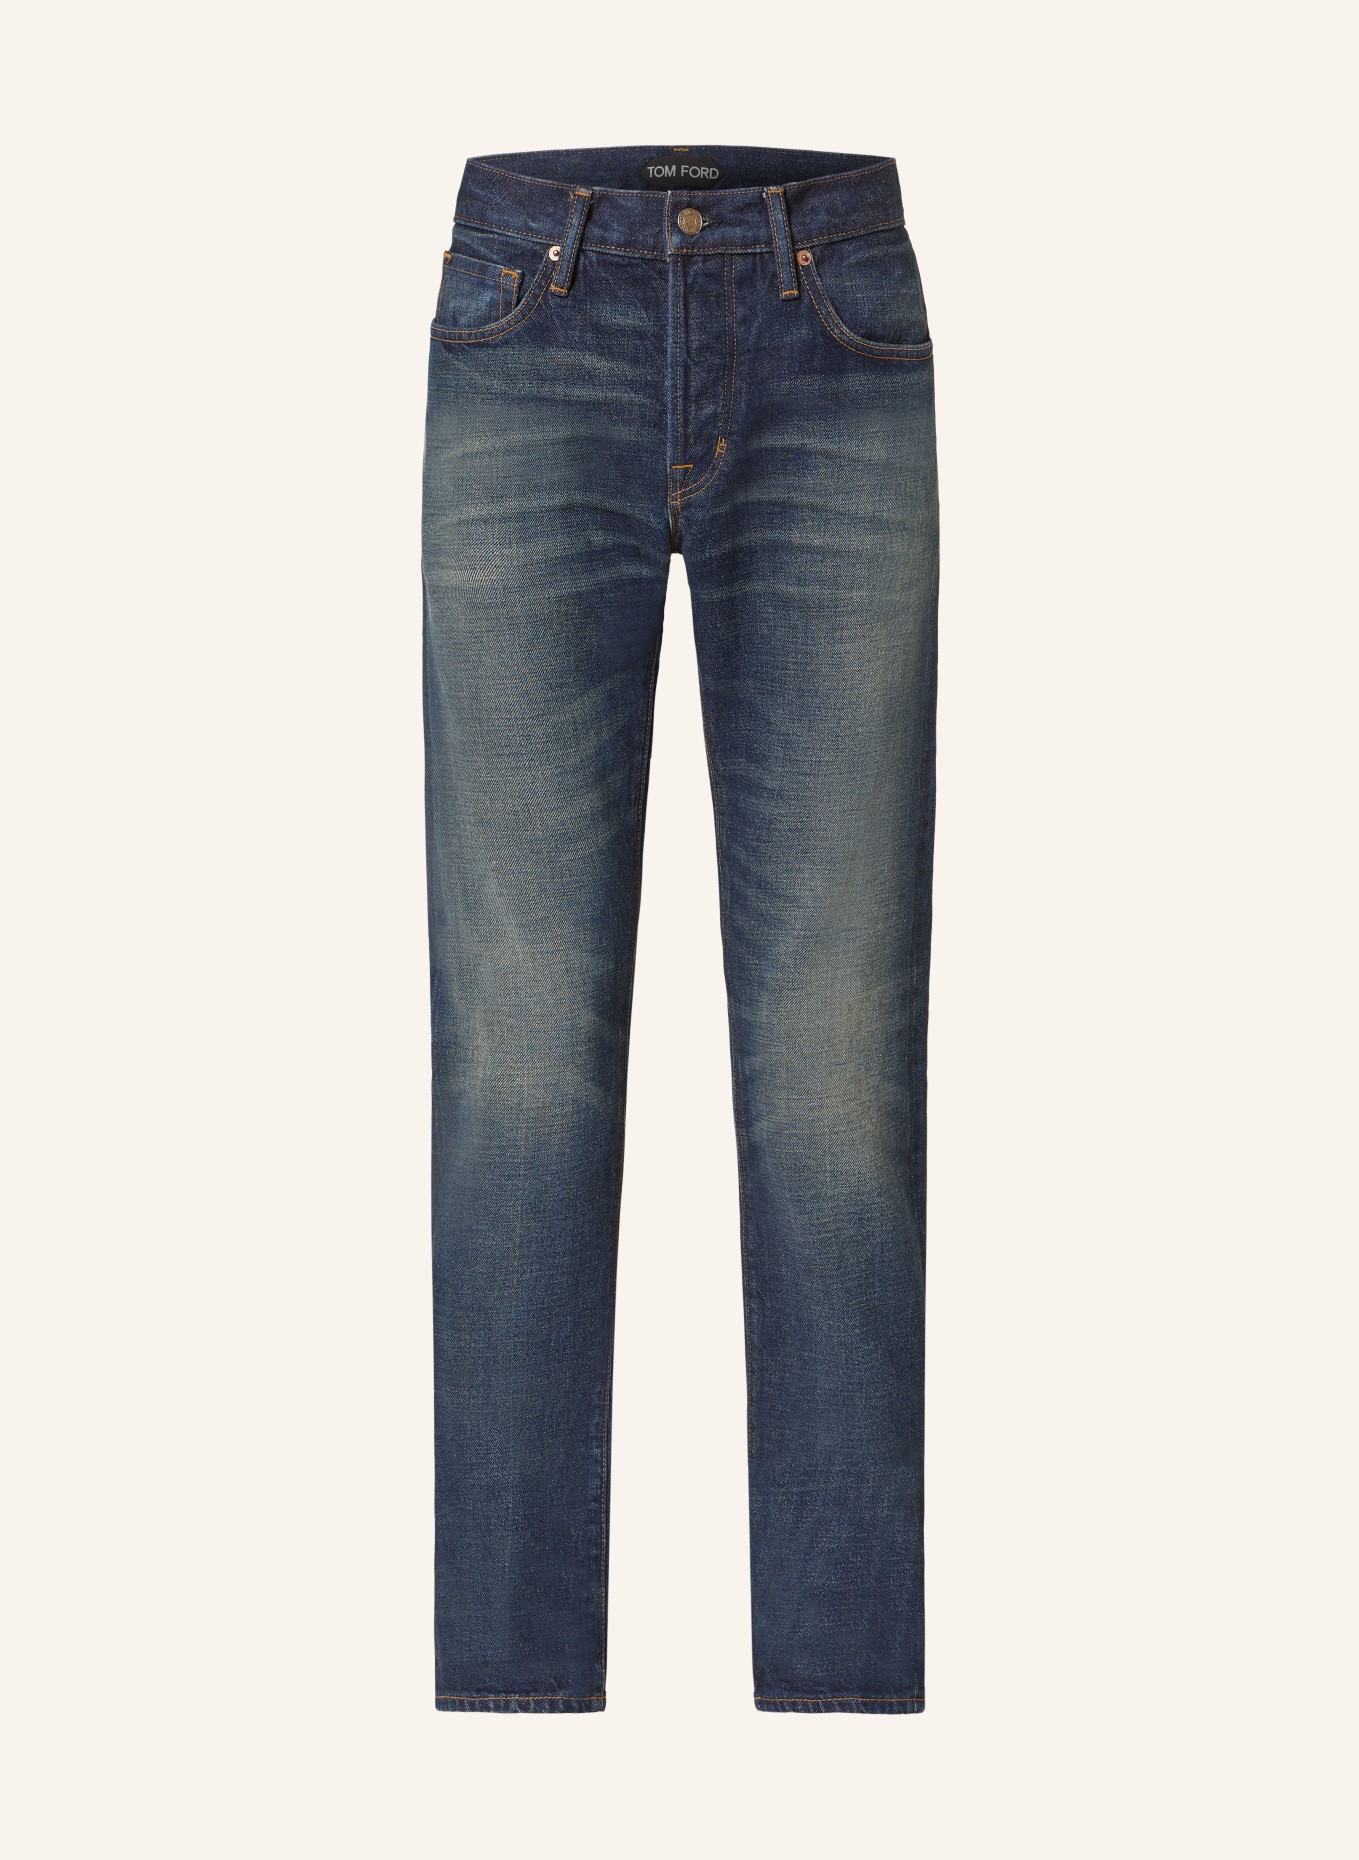 TOM FORD Jeans Standard Fit, Farbe: HB523 STRONG HIGH/LOW BLUE (Bild 1)